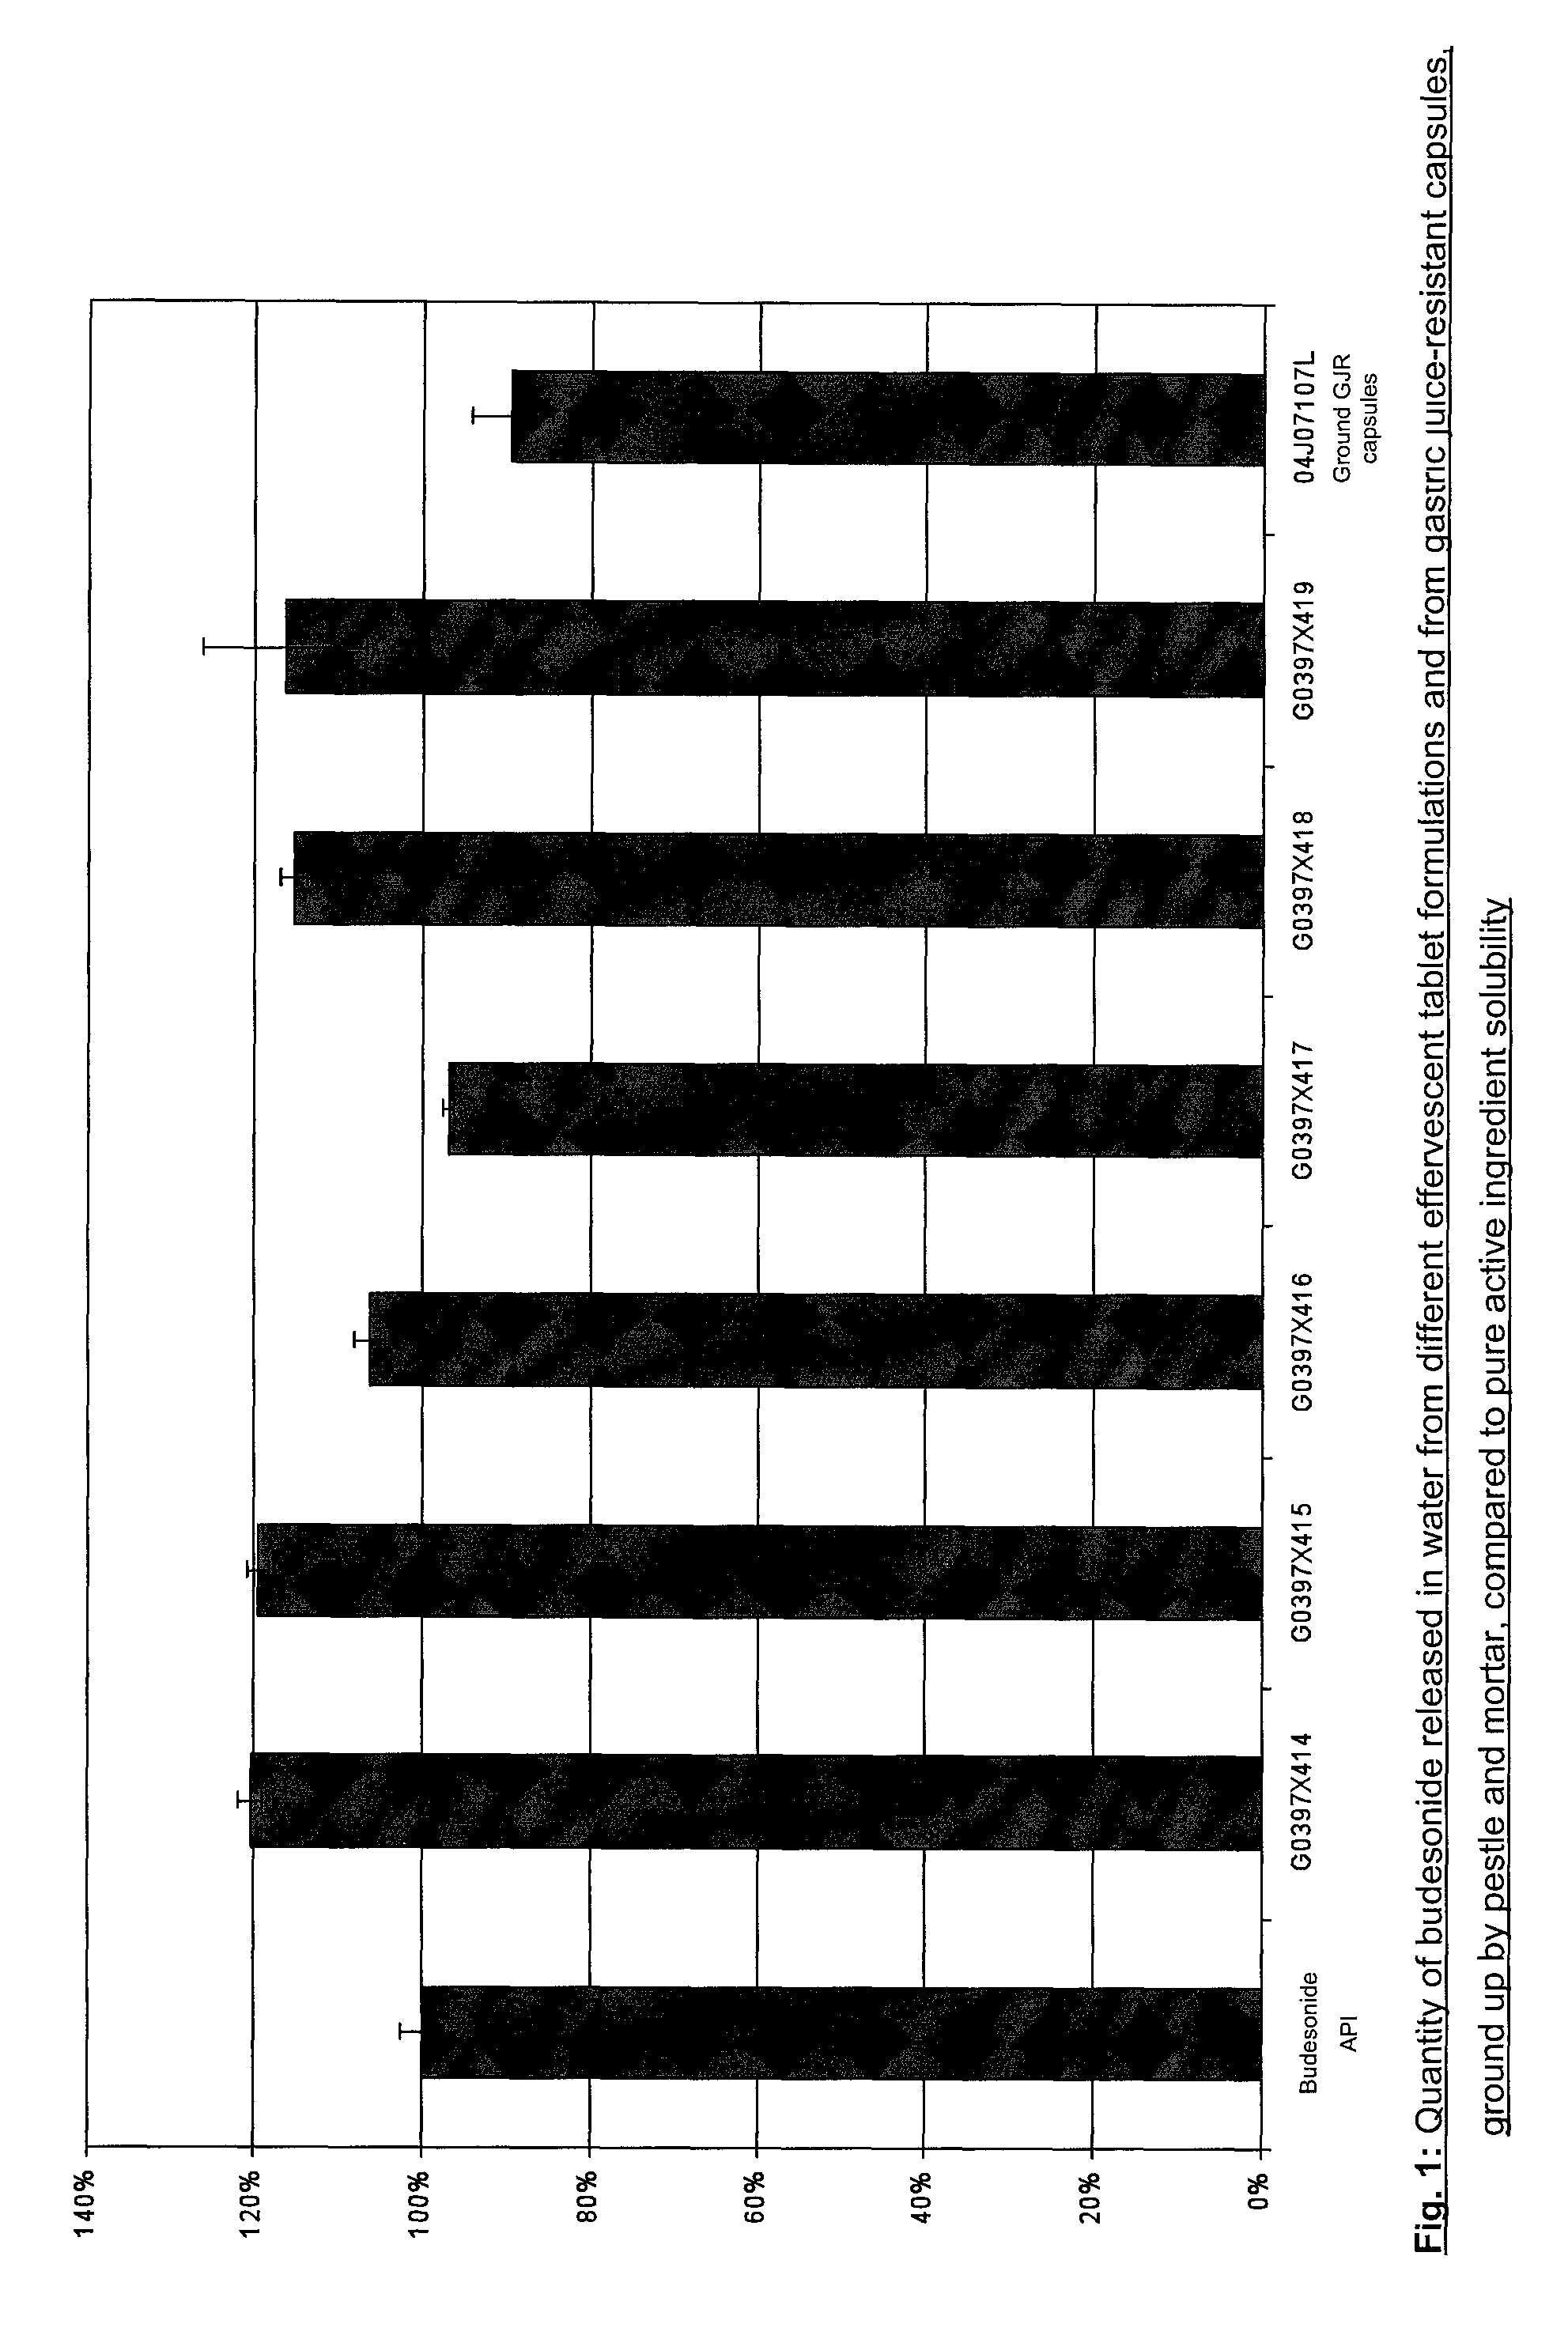 Pharmaceutical formulation for treating the upper digestive tract